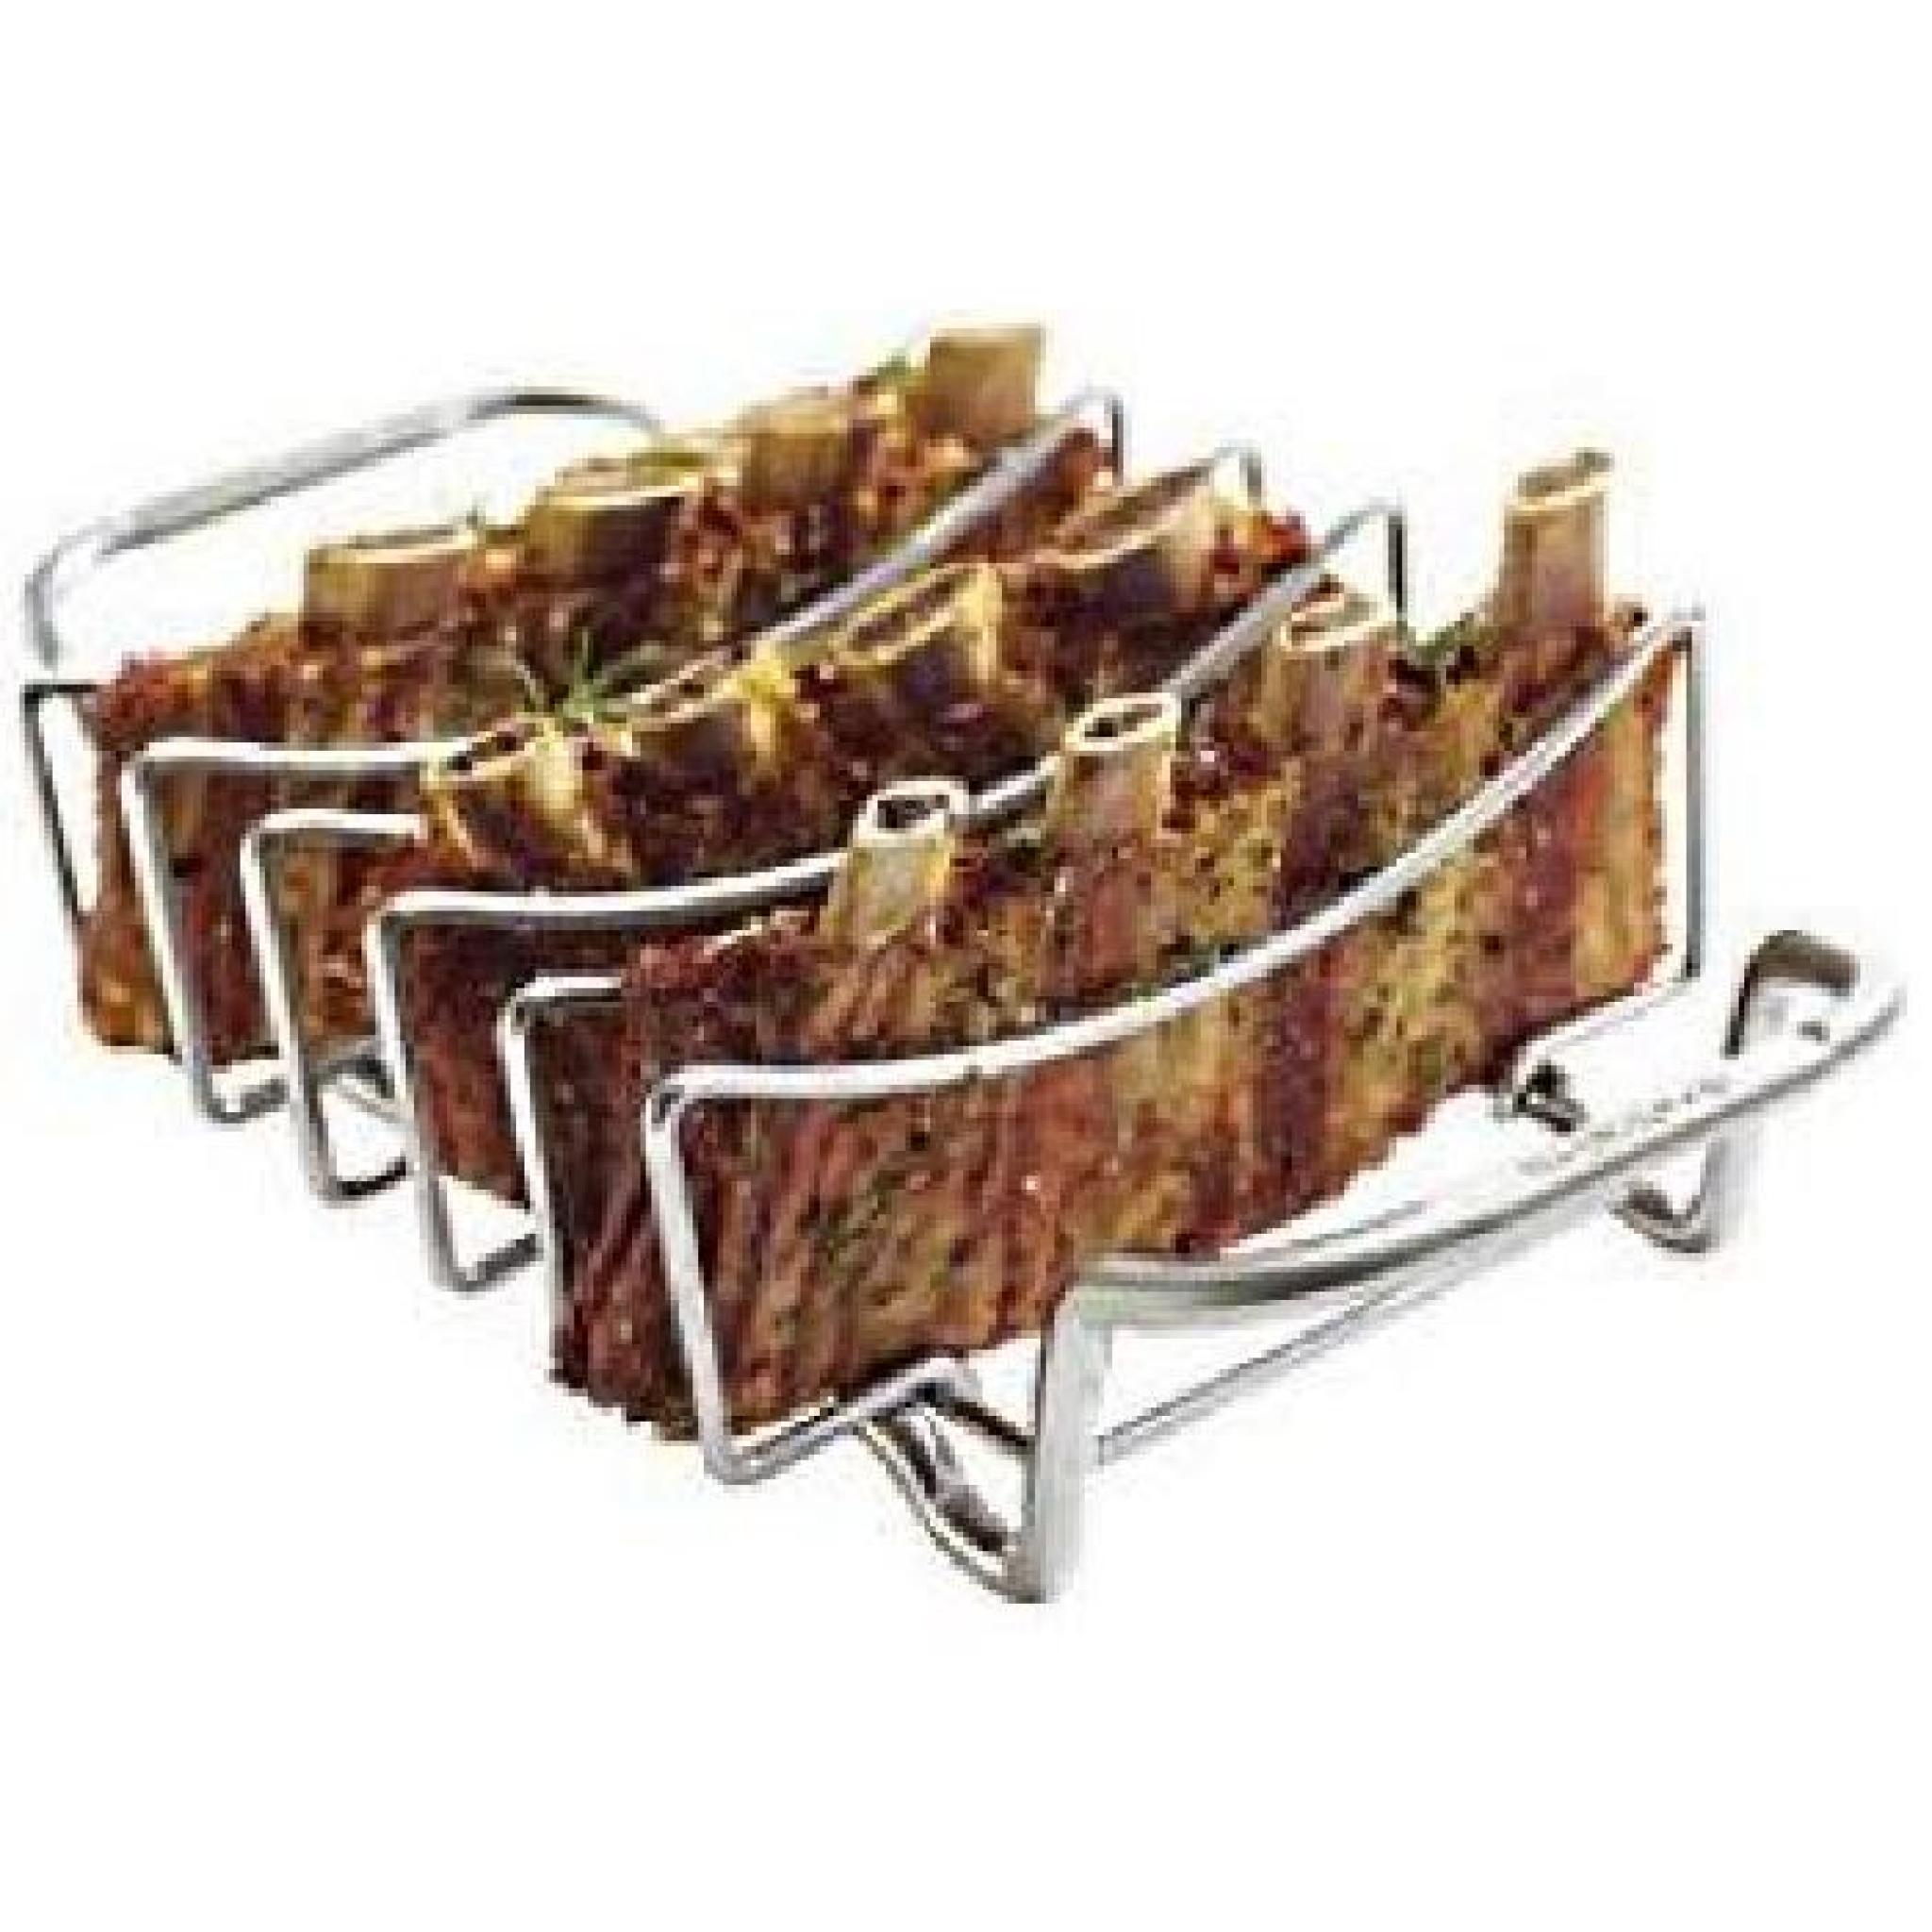 grille et support pour cuissons ribs